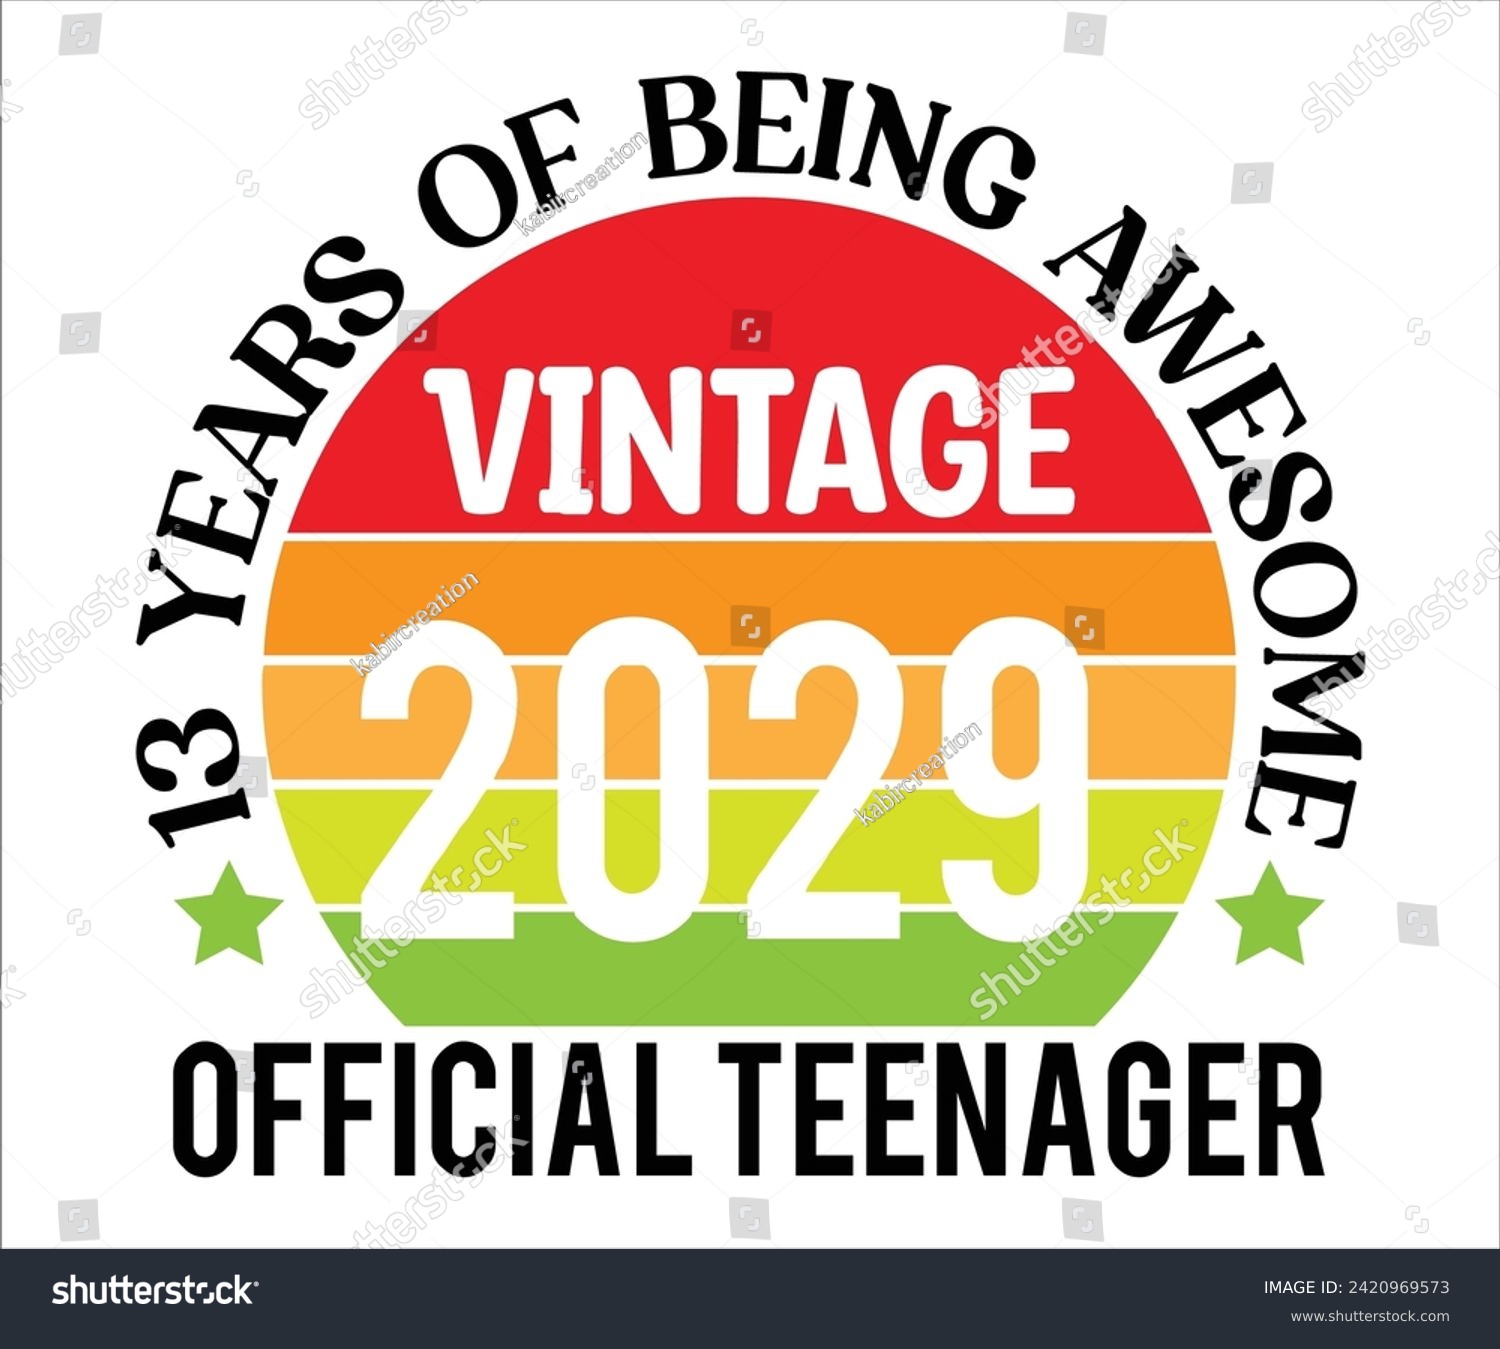 SVG of 13 Years Of Being Wesome 2029 Official Teenager T-shirt,100 Day School Svg,100 Day School T-shirt, welcome Back To, School Day, 100 Days Of School Shirt Boy, 100 Days Shirt svg